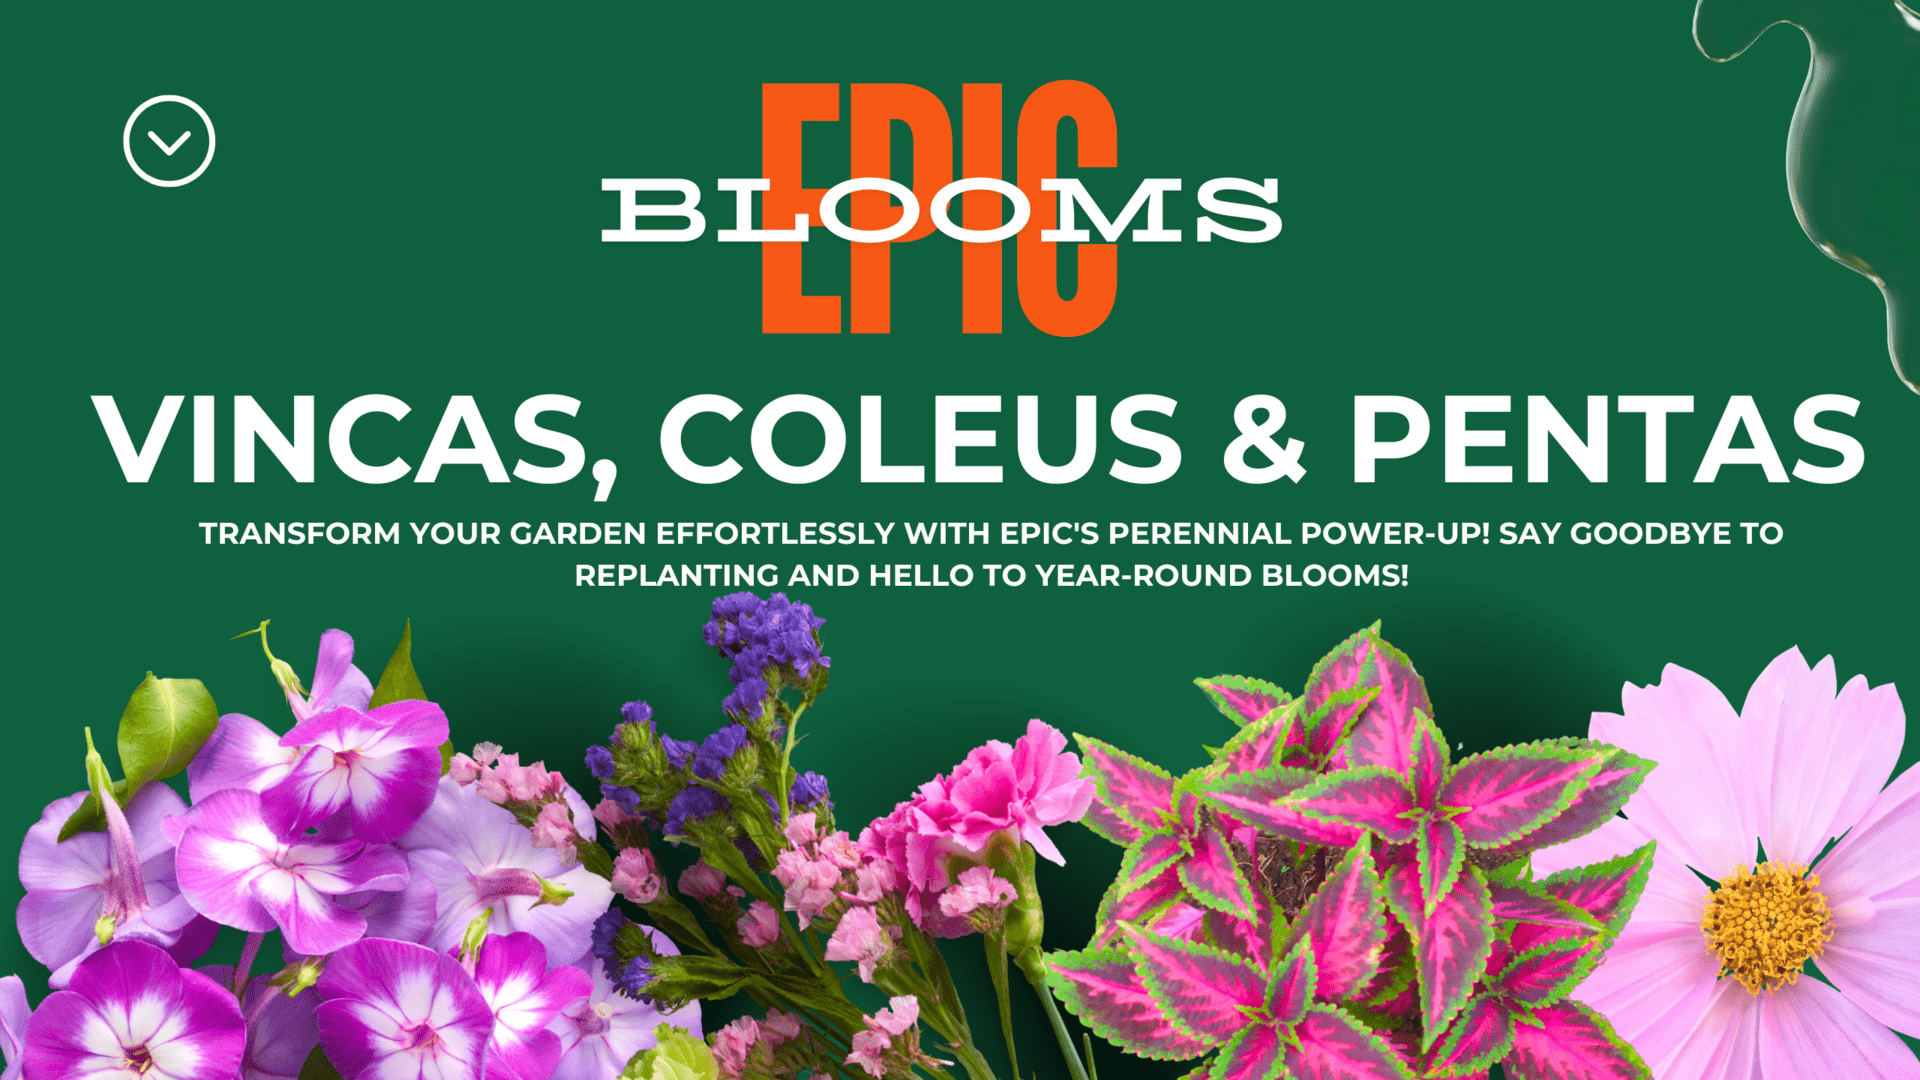 EPIC Blooms. Vincas, Coleus & Pentas. Transform your garden efforlessly with EPIC's perennial power-up! Say goodbye to replanting and hello to year-round blooms!